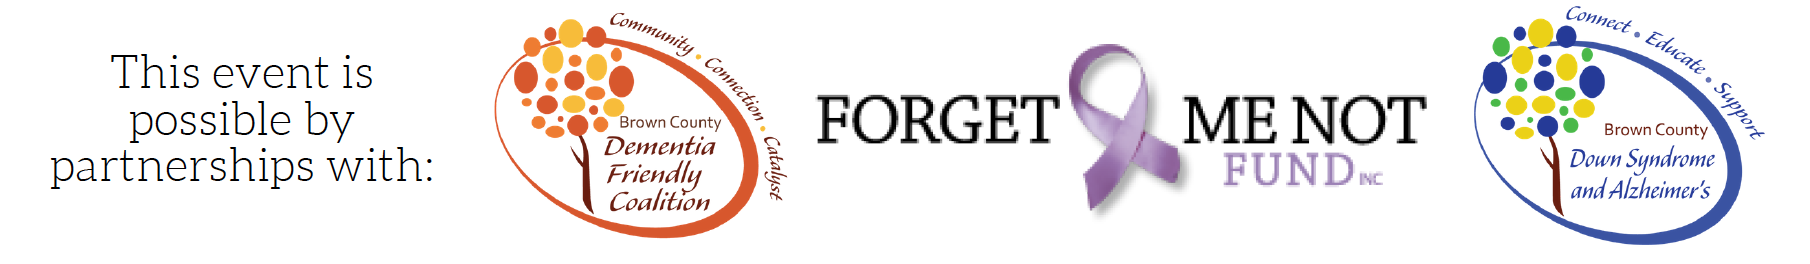 Forget Me Not Fund